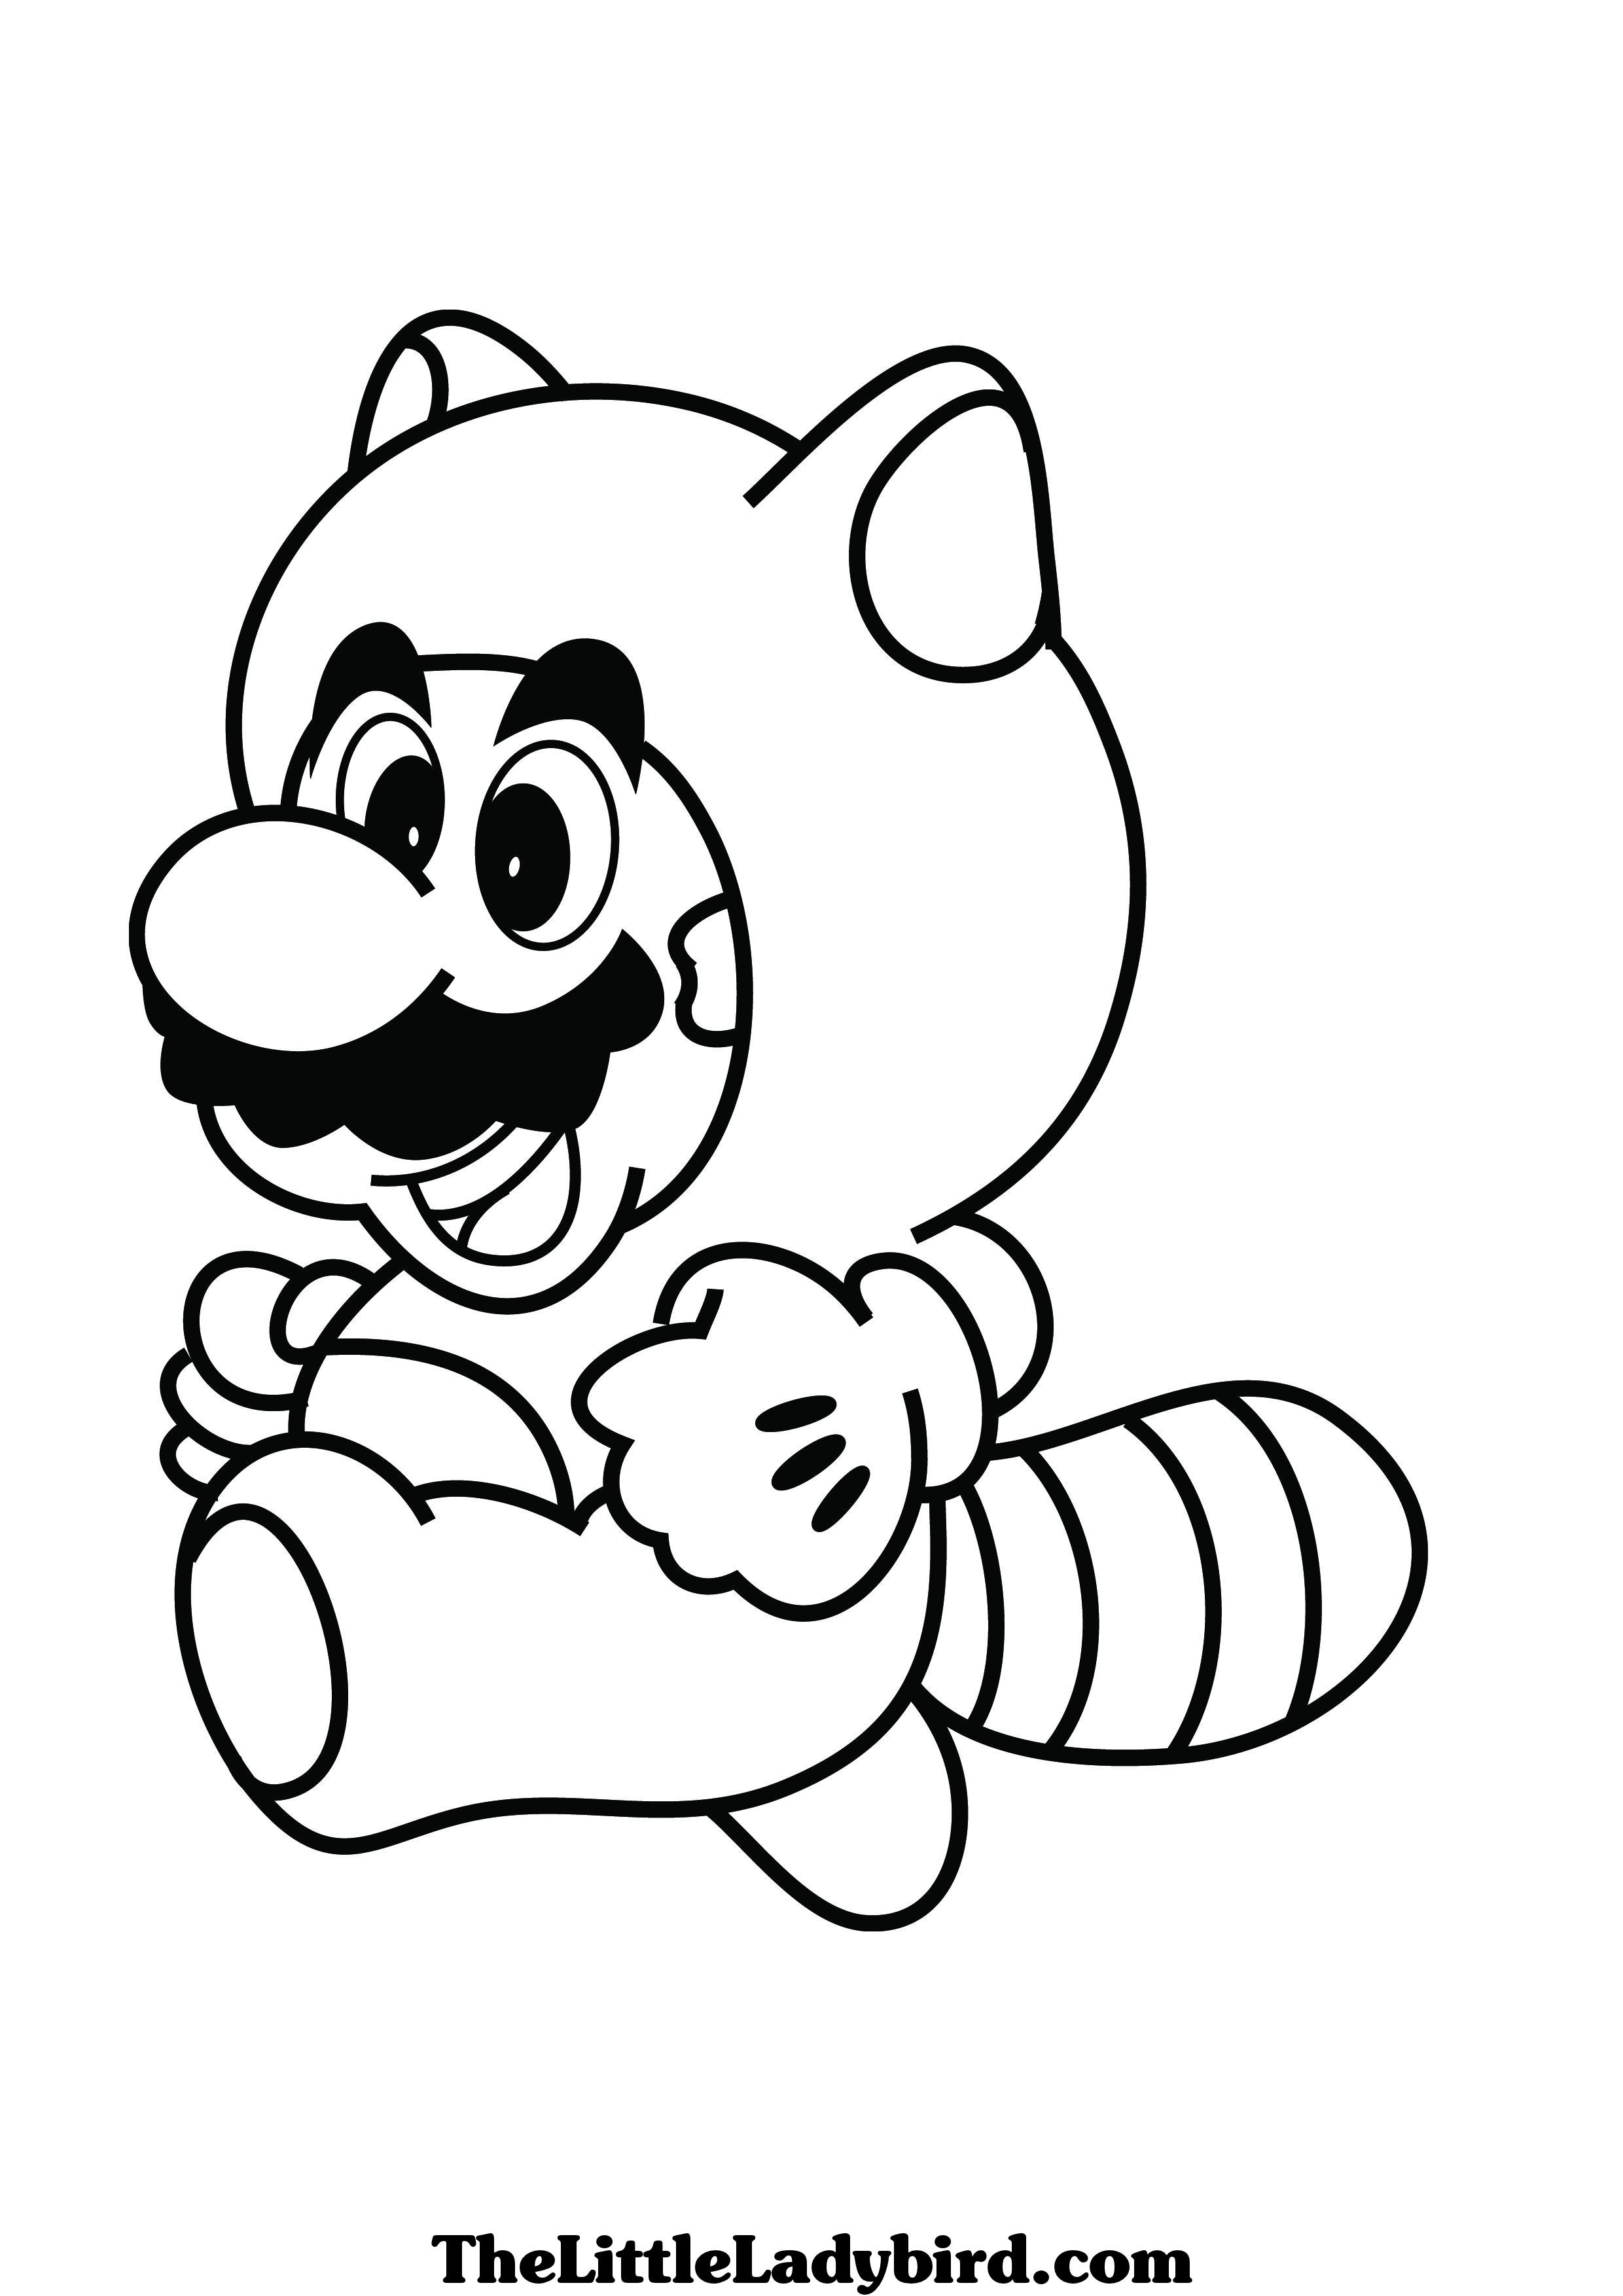  Mario coloring pages | color printing | coloring pages printable | coloring book pages | #23